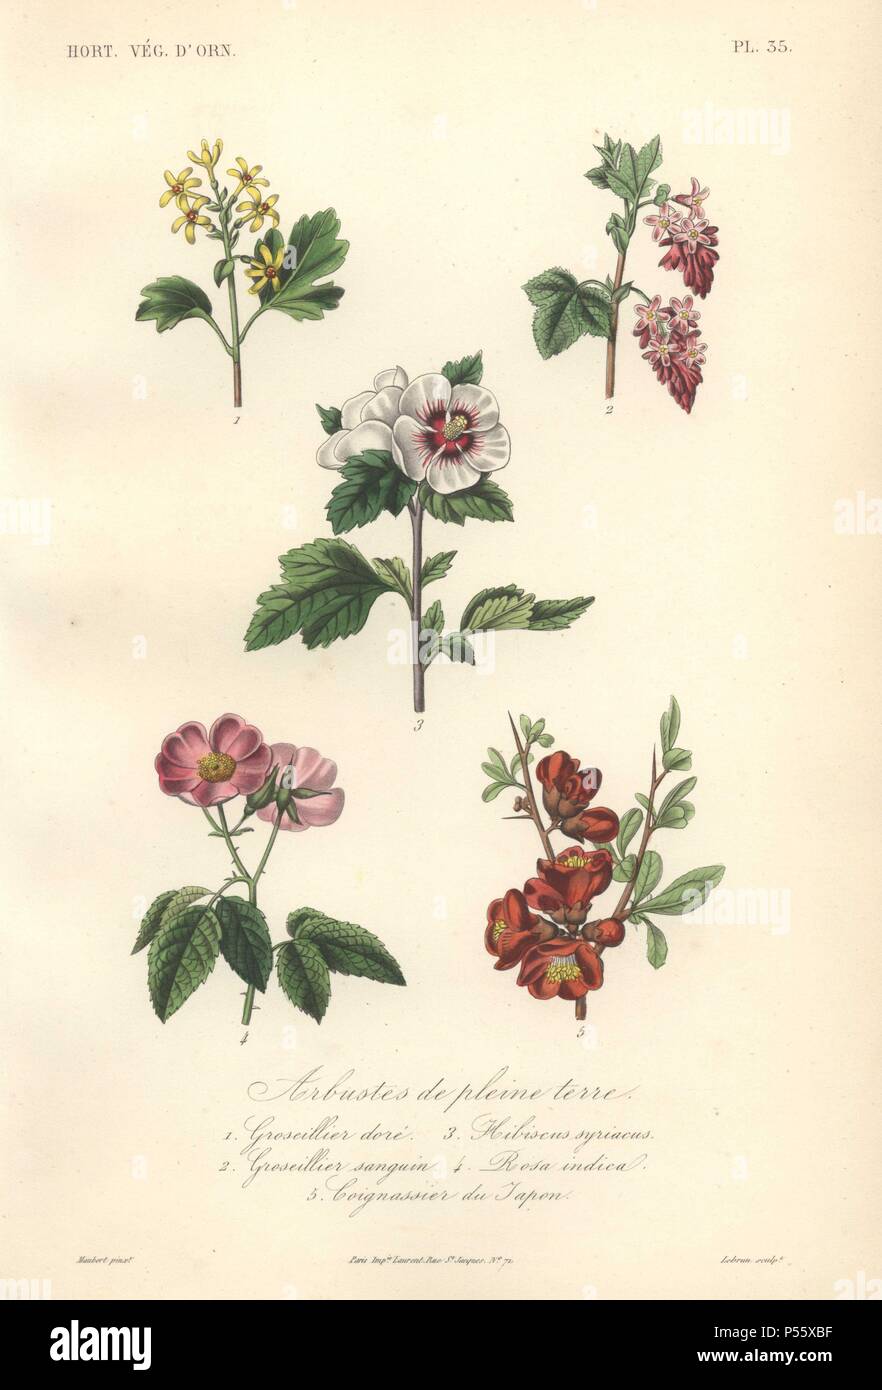 Ornamental shrubs for open ground, including white and crimson hibiscus, pink rose, scarlet Japanese quince, and gold and crimson berries.. . Arbustes de Pleine Terre: 1) Groseillier Dore 2) Groseillier Sanguin 3) Hibiscus Syriacus 4) Rosa Indica 5) Coignassier du Japon . . Handcolored lithograph by Edouard Maubert for Herincq's 'Le Regne Vegetal' (1865). Stock Photo